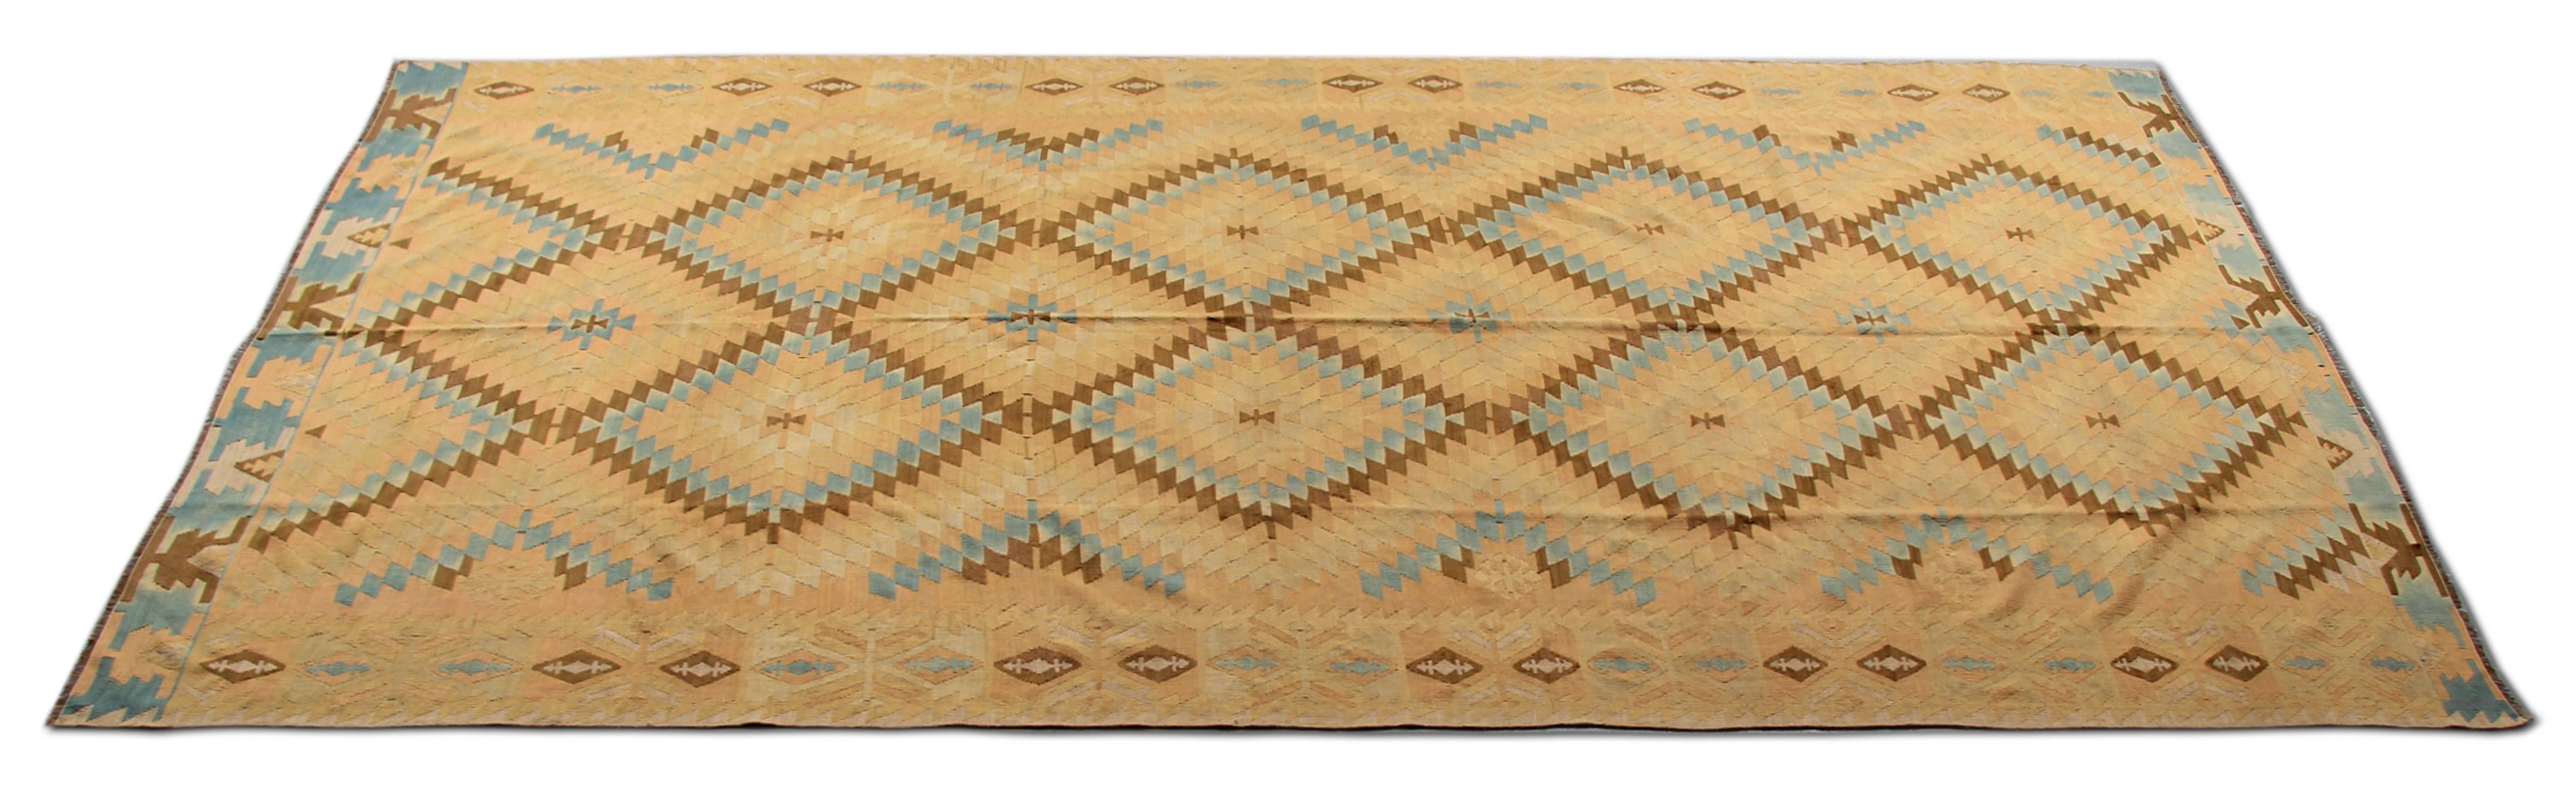 This stunning Kilim rug has been hand-dyed and hand-woven to create its unique colour and pattern. This Antique rug has a striking colour combination of yellow, navy, gold, cream and various shades of blue. This Kilim runner rug has clear influences